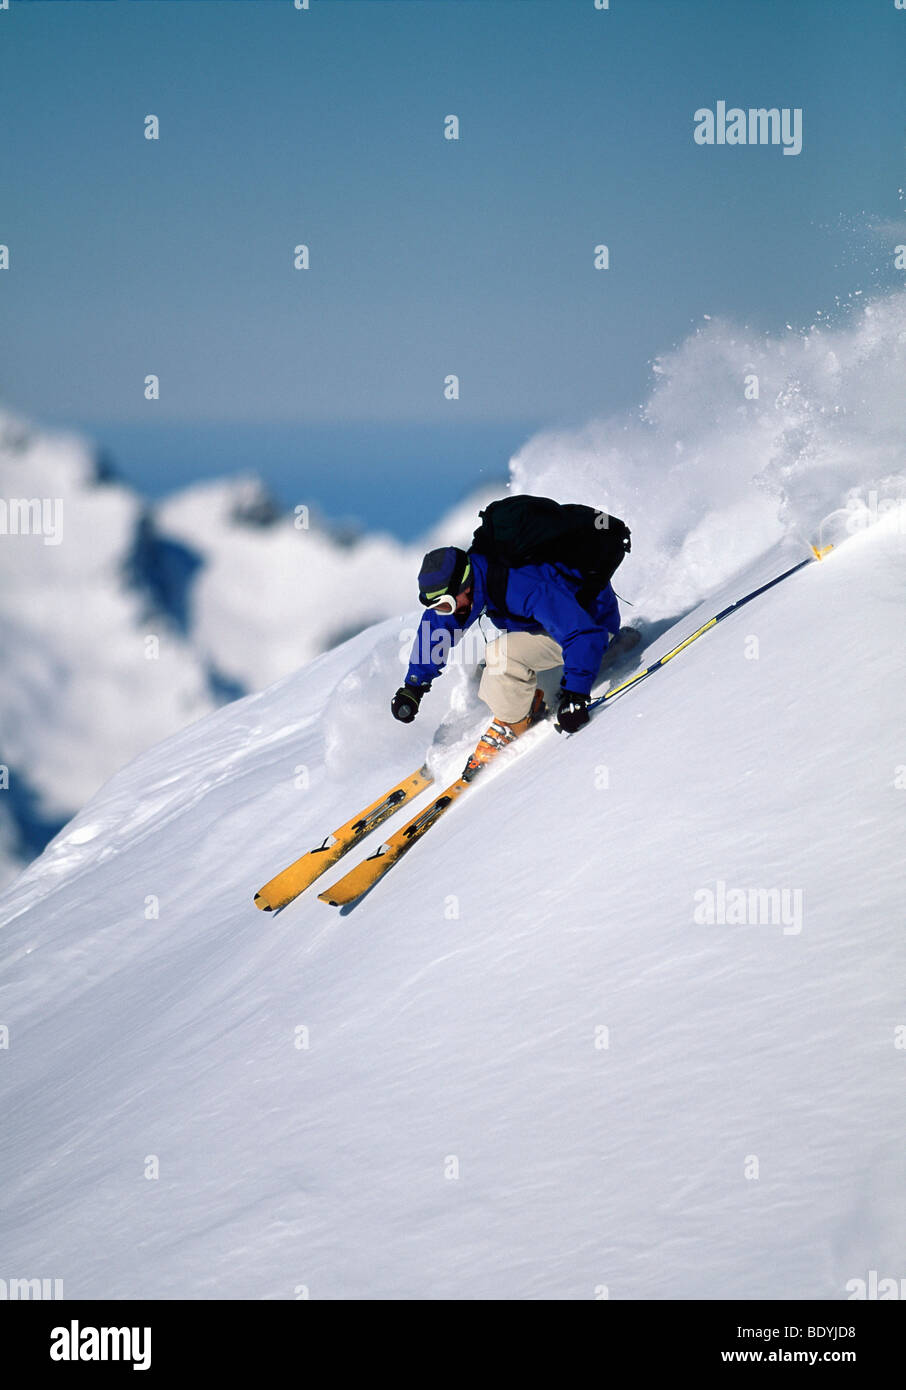 Skier turning down a snow slope Stock Photo